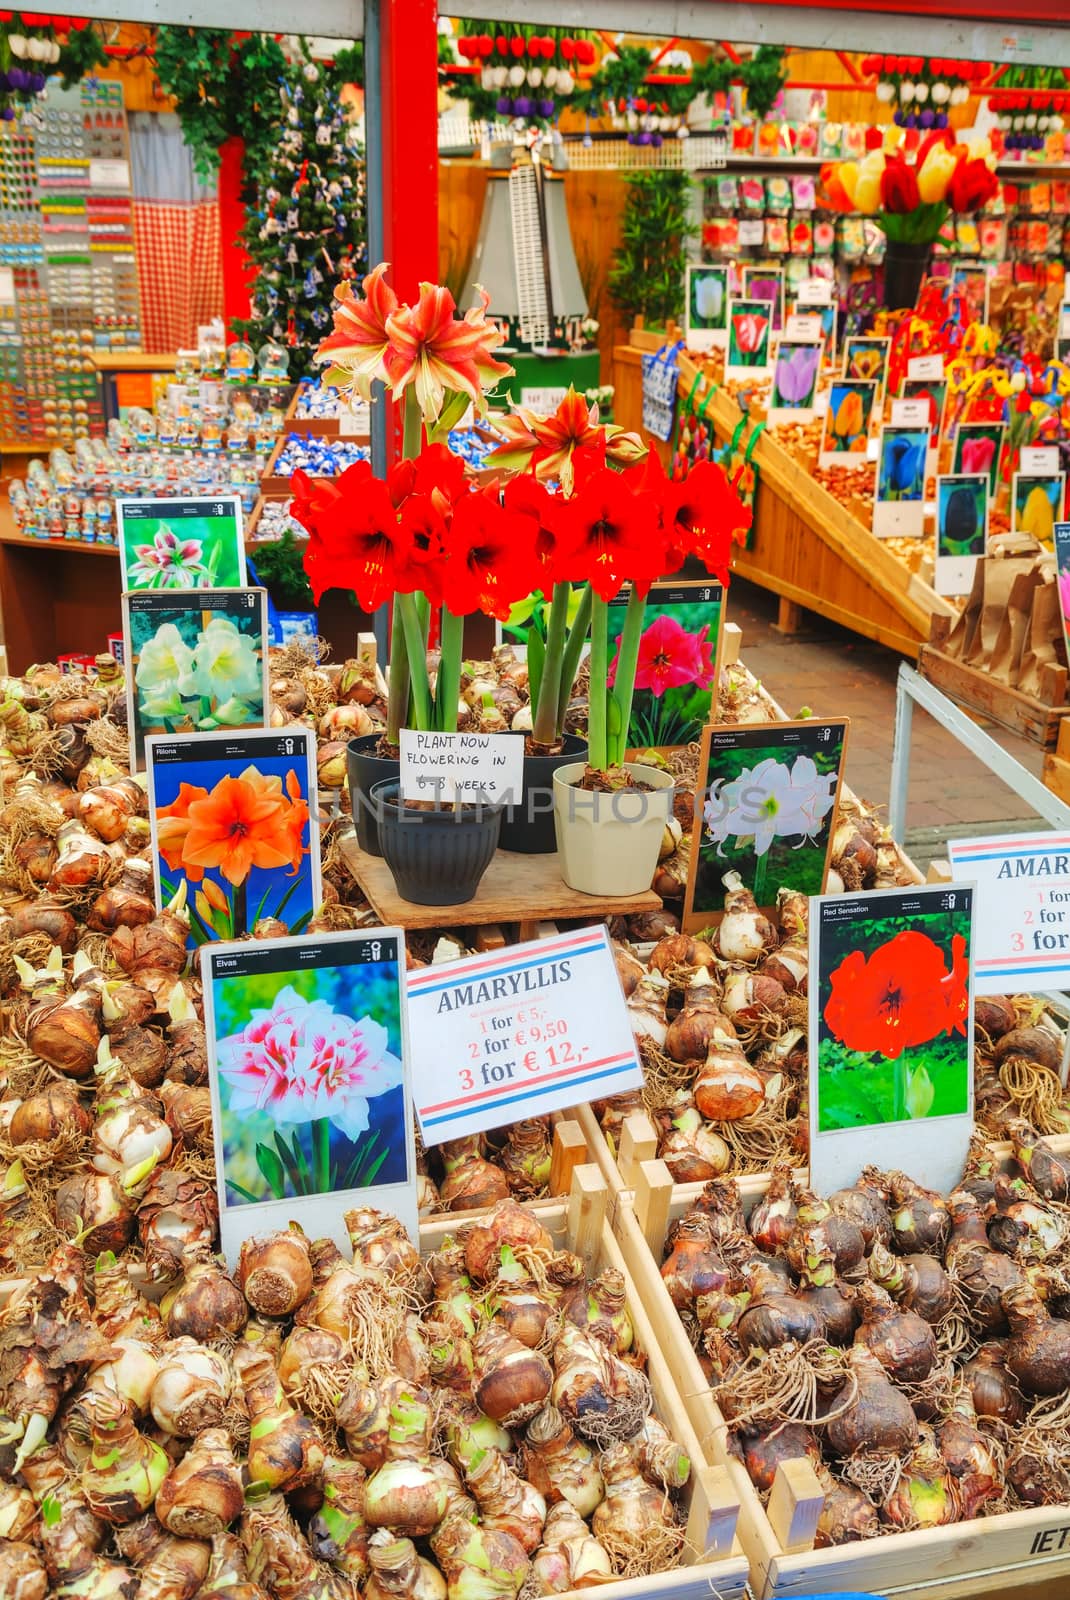 AMSTERDAM - APRIL 17: Boxes with bulbs at the Floating flower market  on April 17, 2015 in Amsterdam, Netherlands. It’s usually billed as the “world’s only floating flower market”.